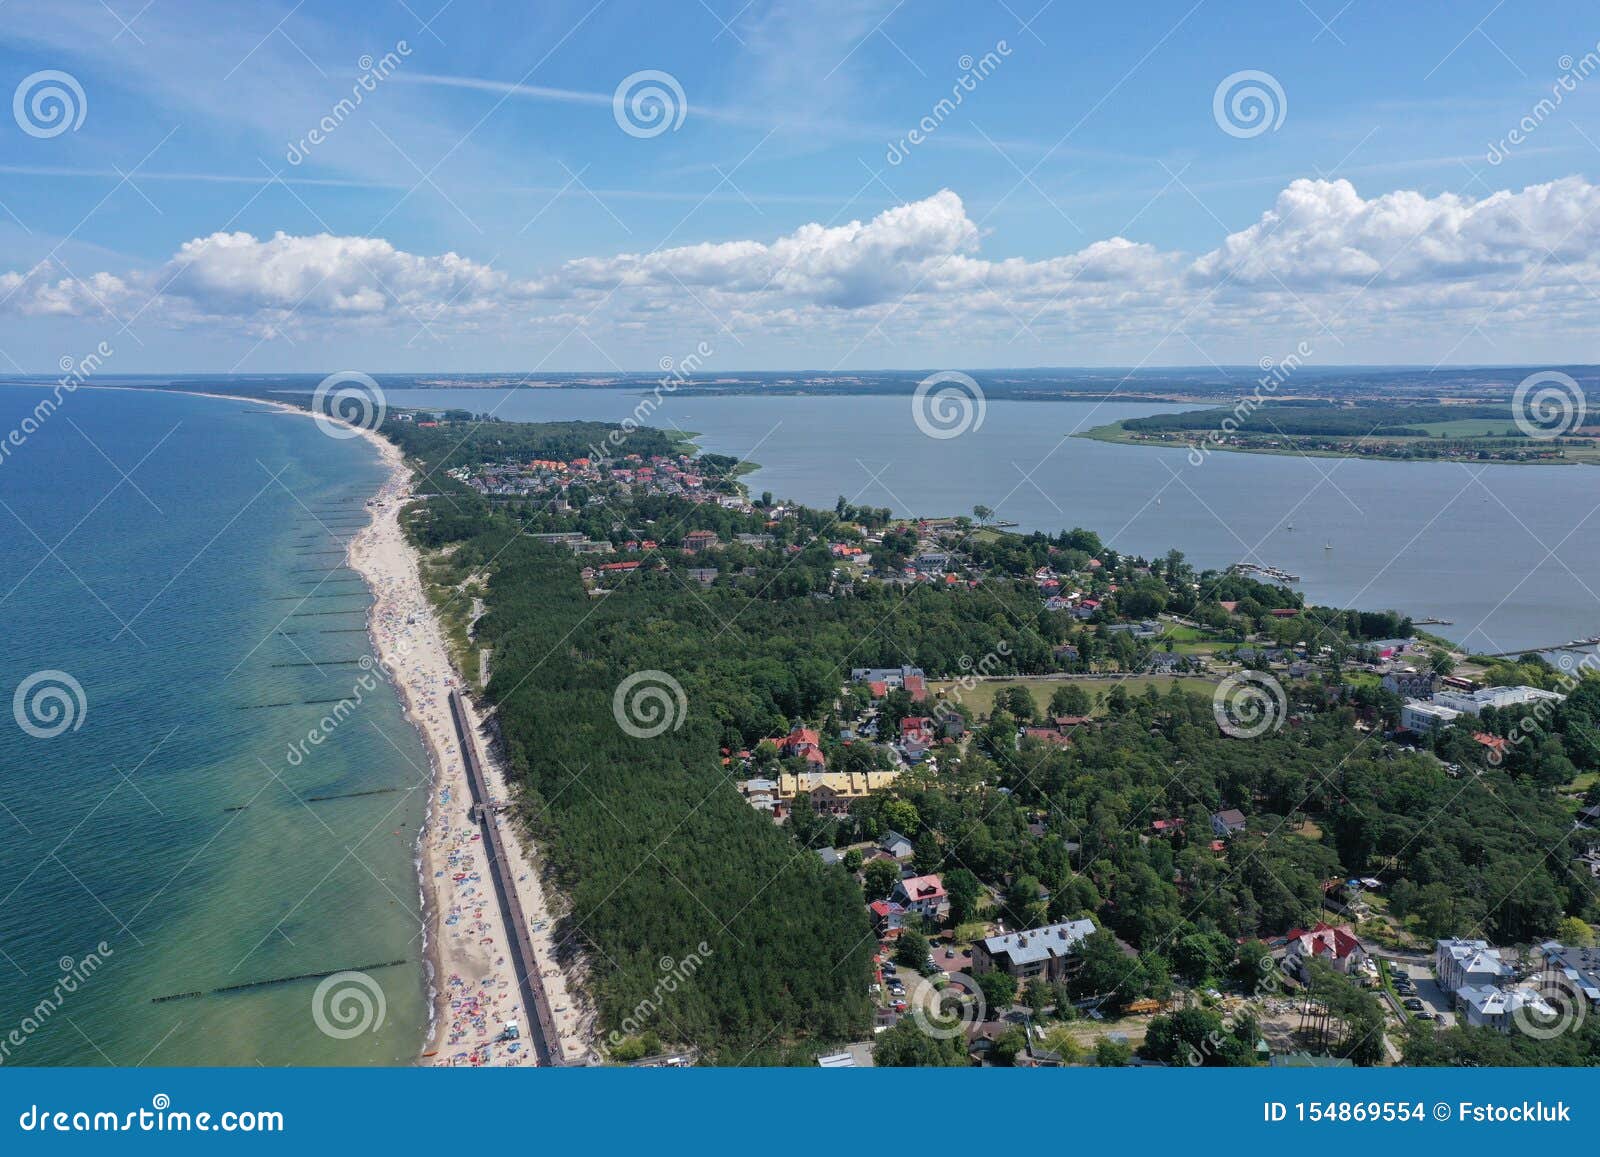 drone aerial perspective view on touristic city located on narrow spit between sea and lake with sunbathers on sand beach